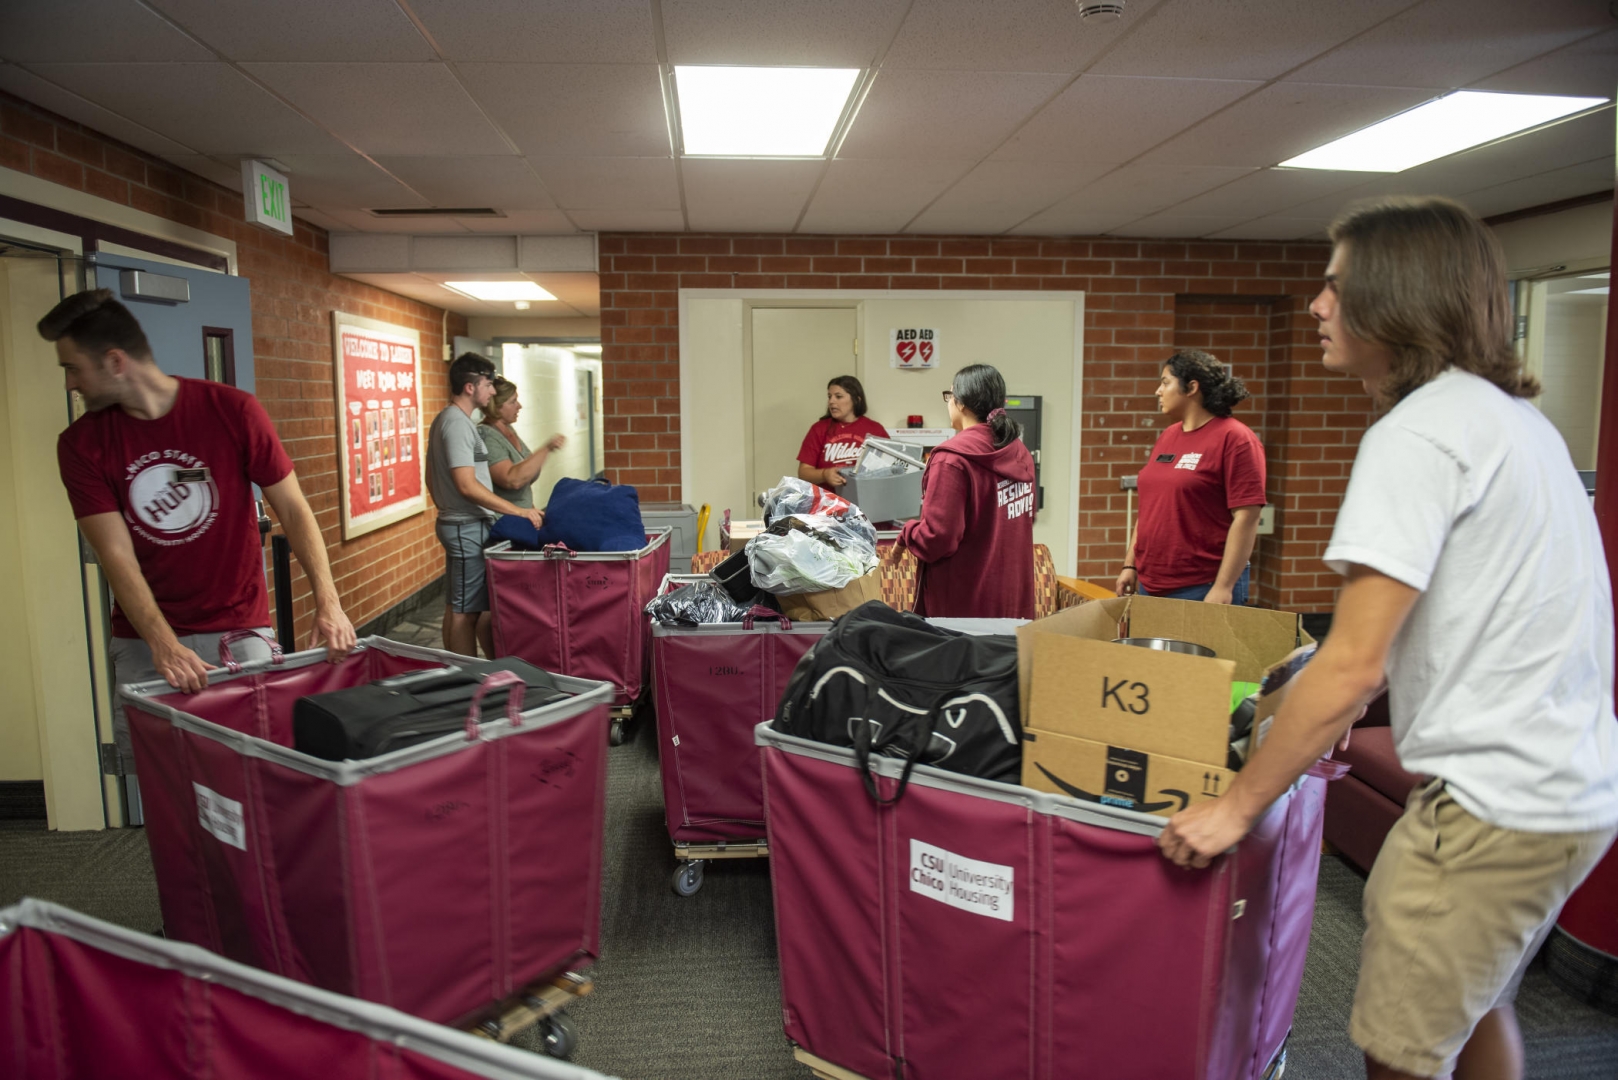 Students and volunteers push carts full of student belongings through the lobby of a residence hall